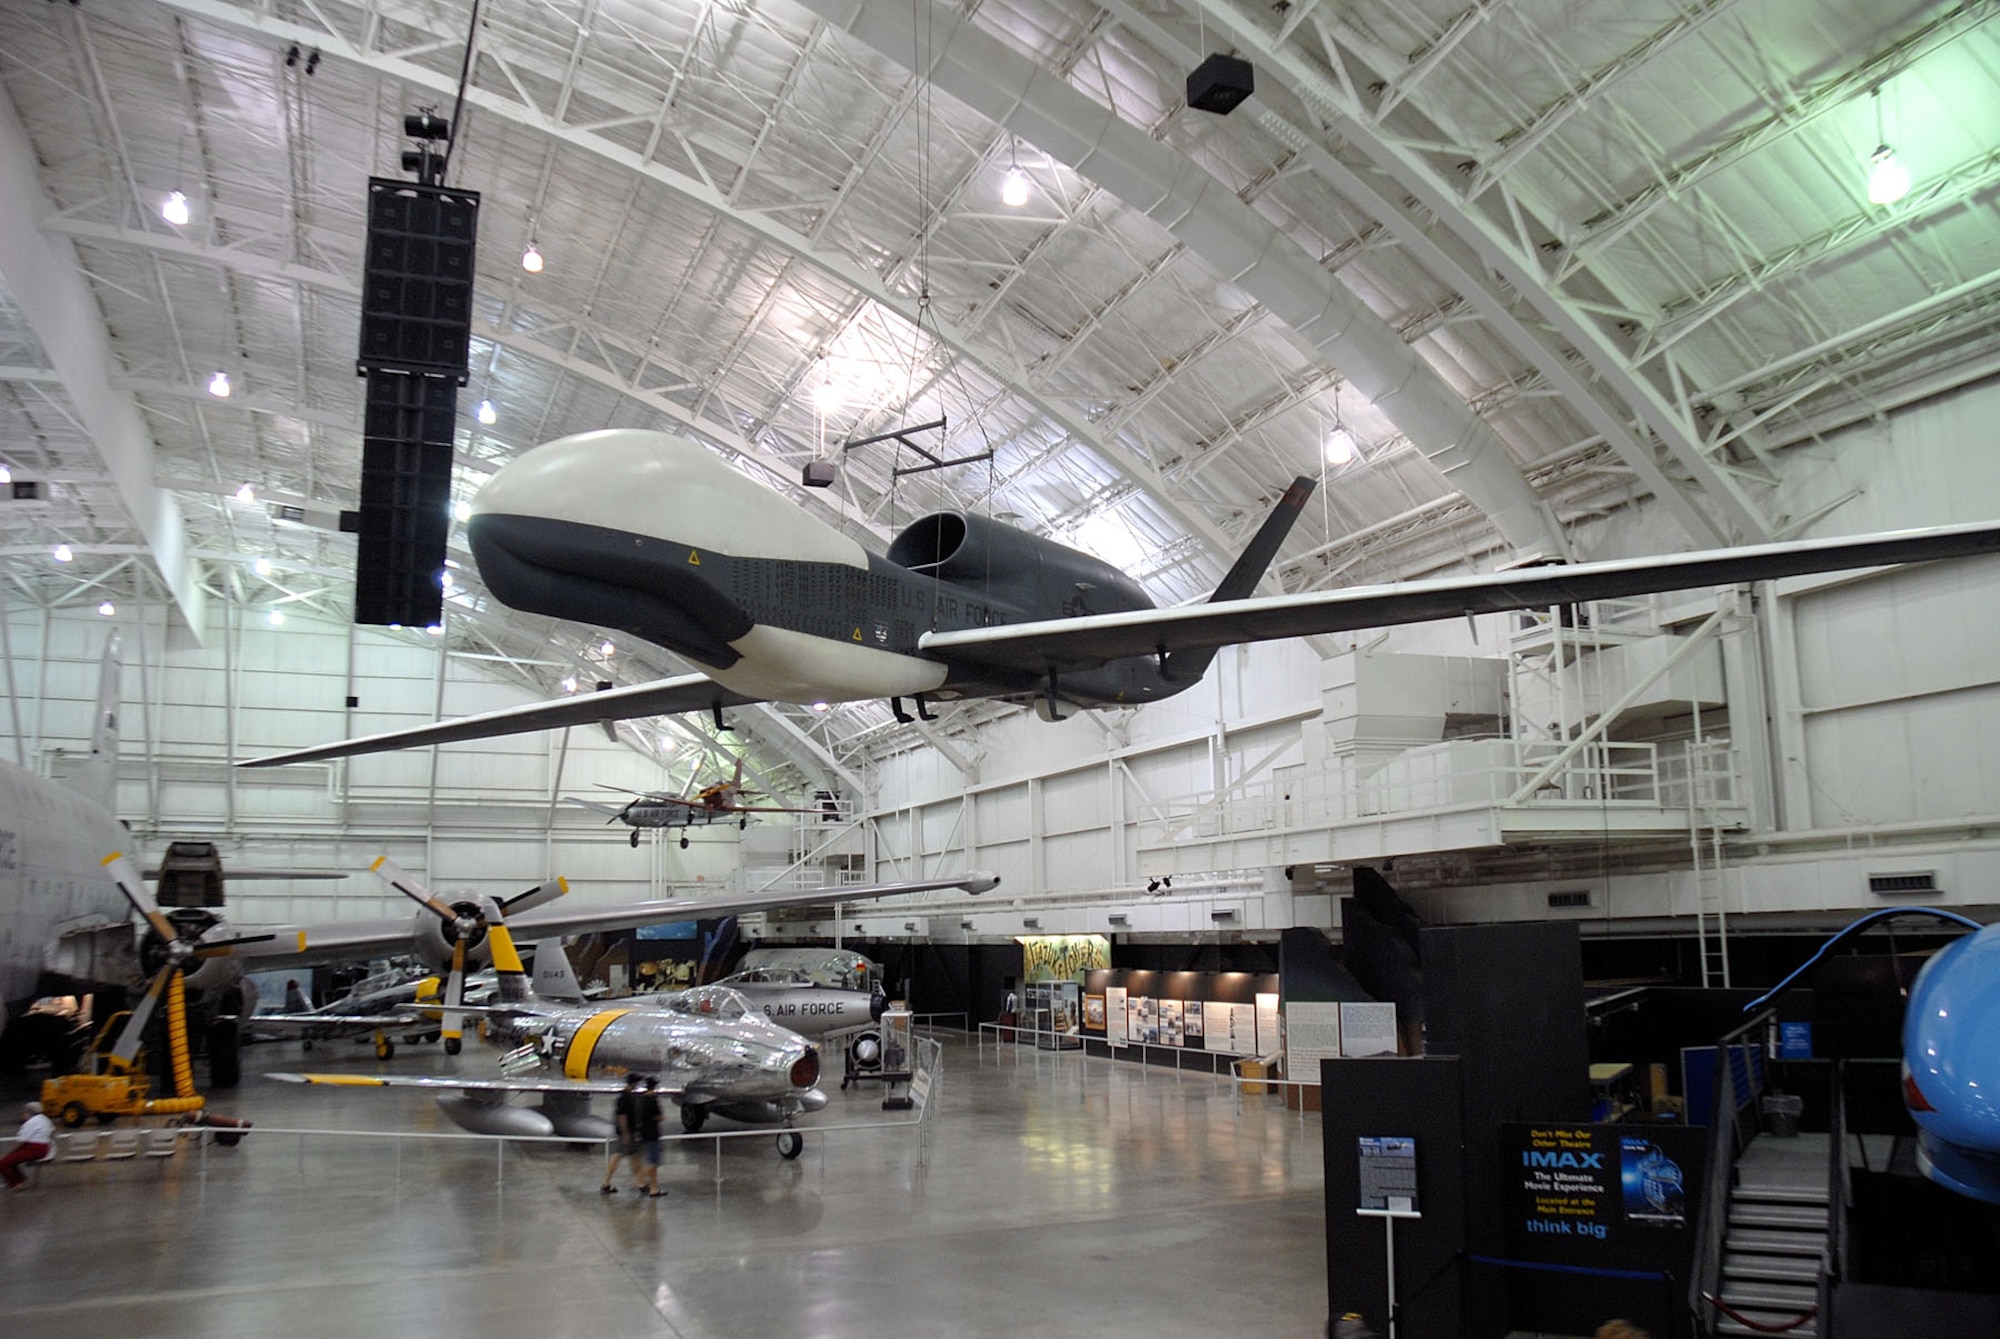 DAYTON, Ohio -- Northrop Grumman RQ-4 Global Hawk at the National Museum of the United States Air Force. (U.S. Air Force photo)